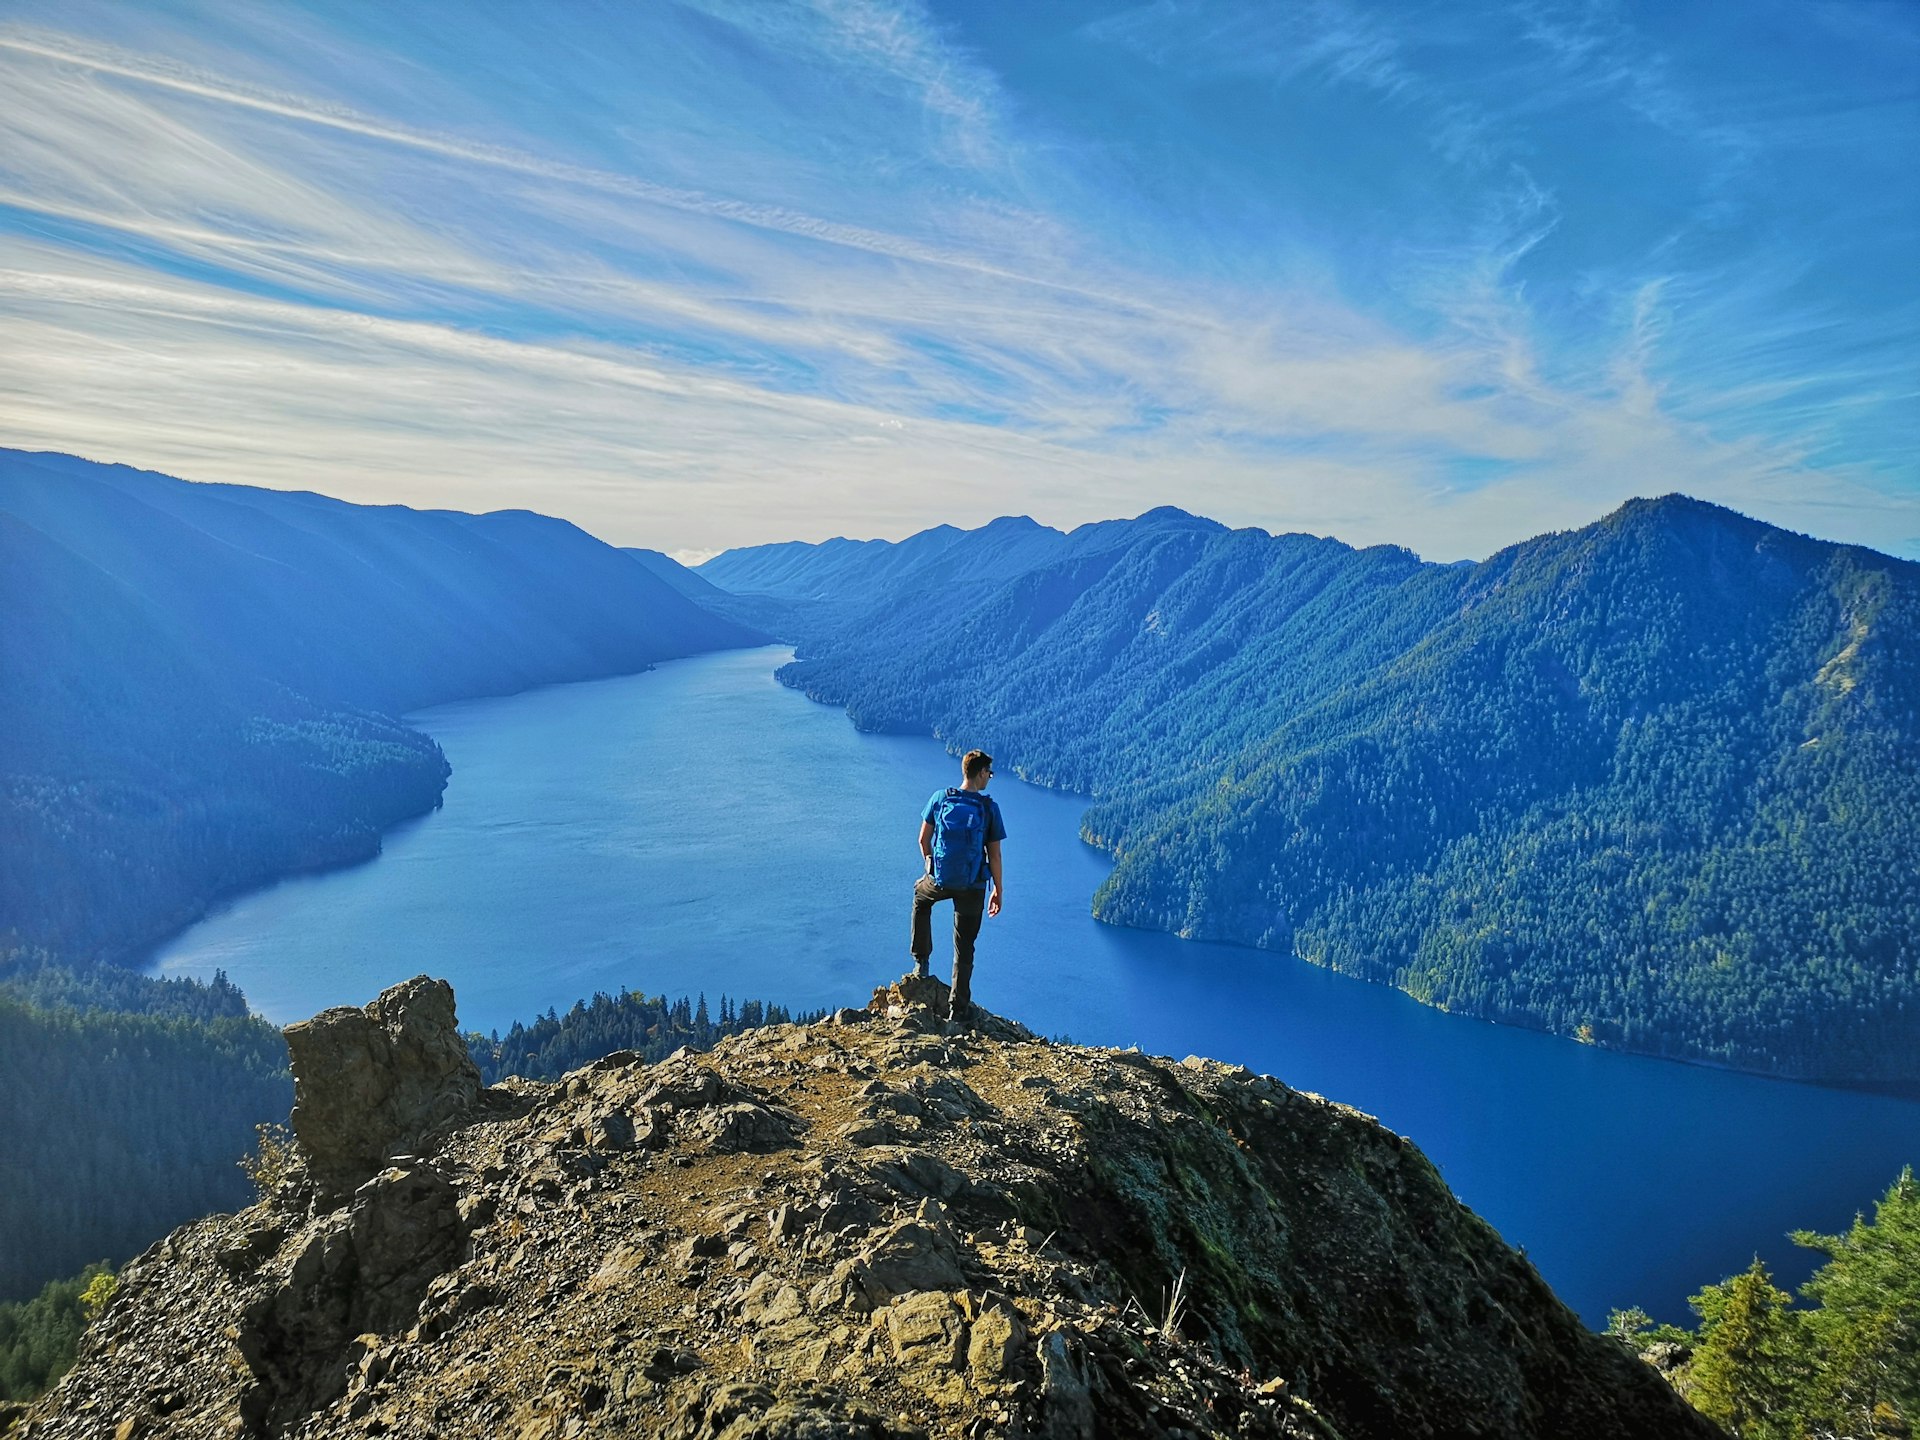 A man stands on a mountain peak looking down towards a lake